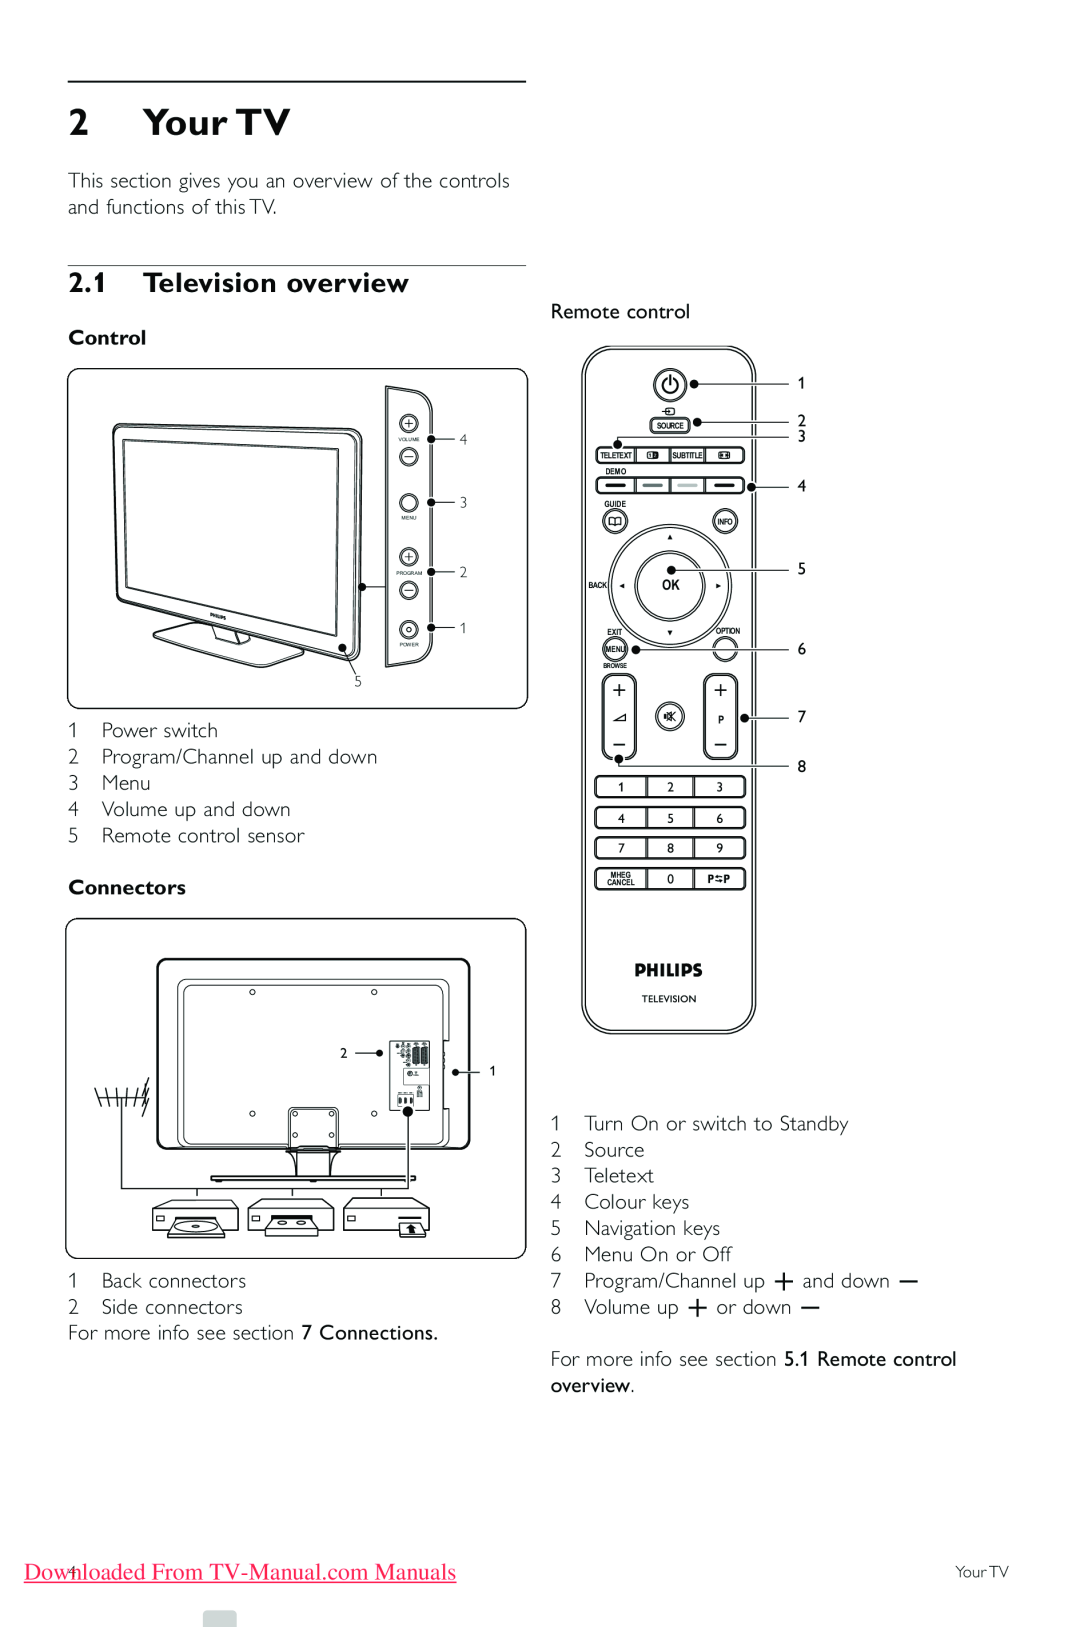 Philips 43PFL5603, 42PFL5403 Your TV, 2.1Television overview, Control, Connectors, Downloaded From TV-Manual.comManuals 